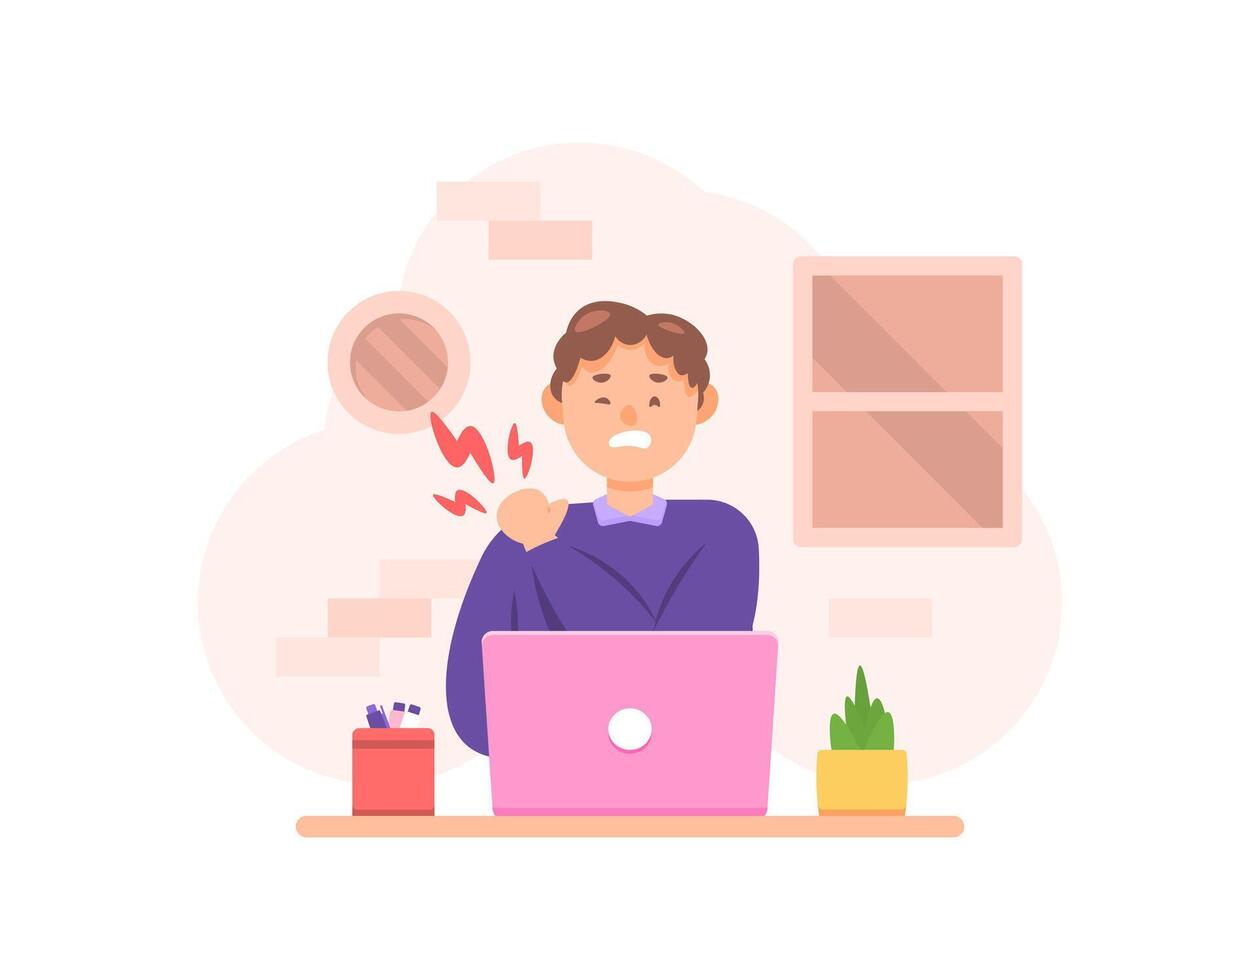 illustration of a man feeling pain in his shoulder. shoulder pain when working. Shoulder muscles are sore and stiff due to working too long. health problems in workers or employees. character vector